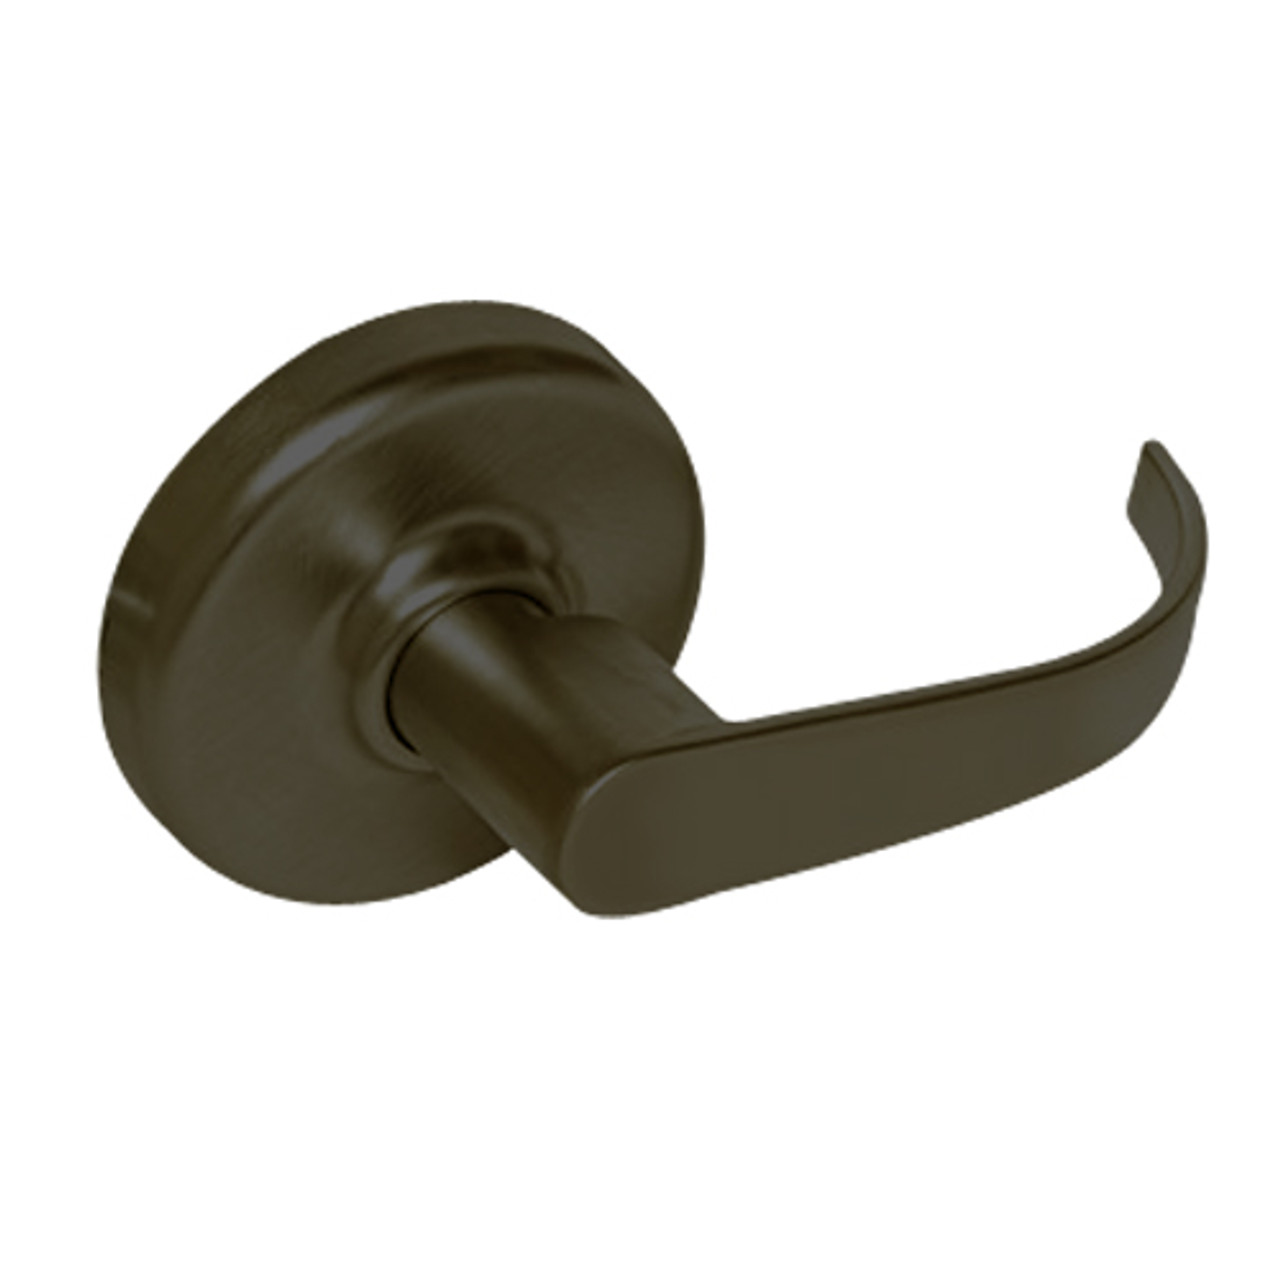 CL3390-PZD-613 Corbin CL3300 Series Extra Heavy Duty Passage with Turnpiece Cylindrical Locksets with Princeton Lever in Oil Rubbed Bronze Finish